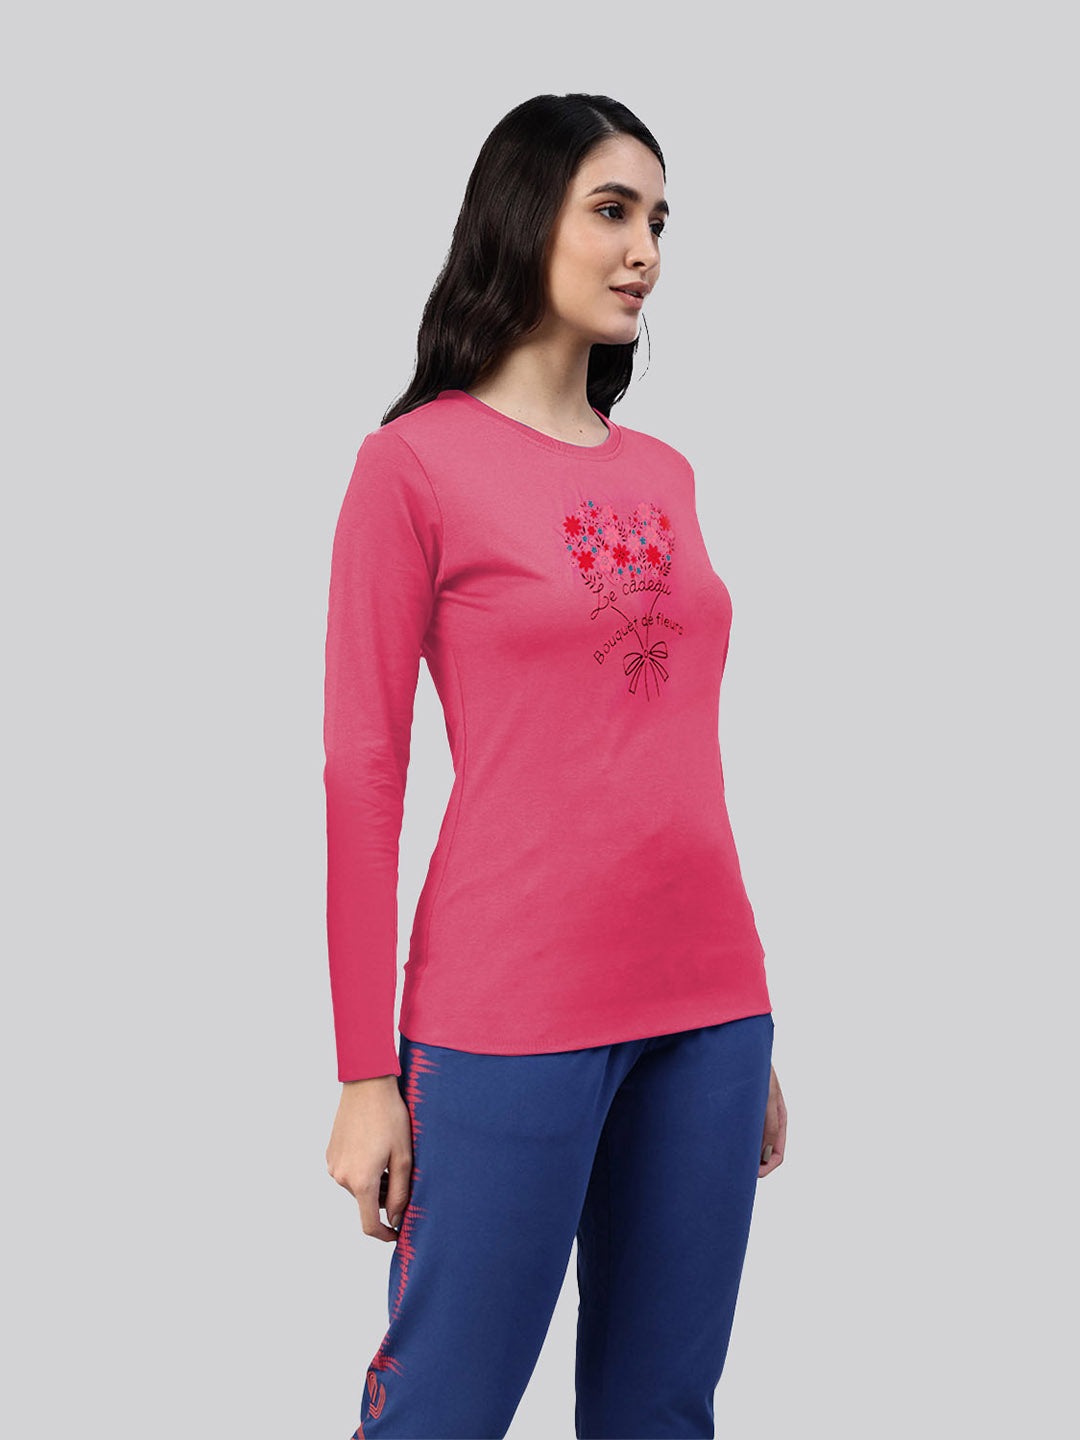 Pink printed round neck full sleeve t-shirt for ladies